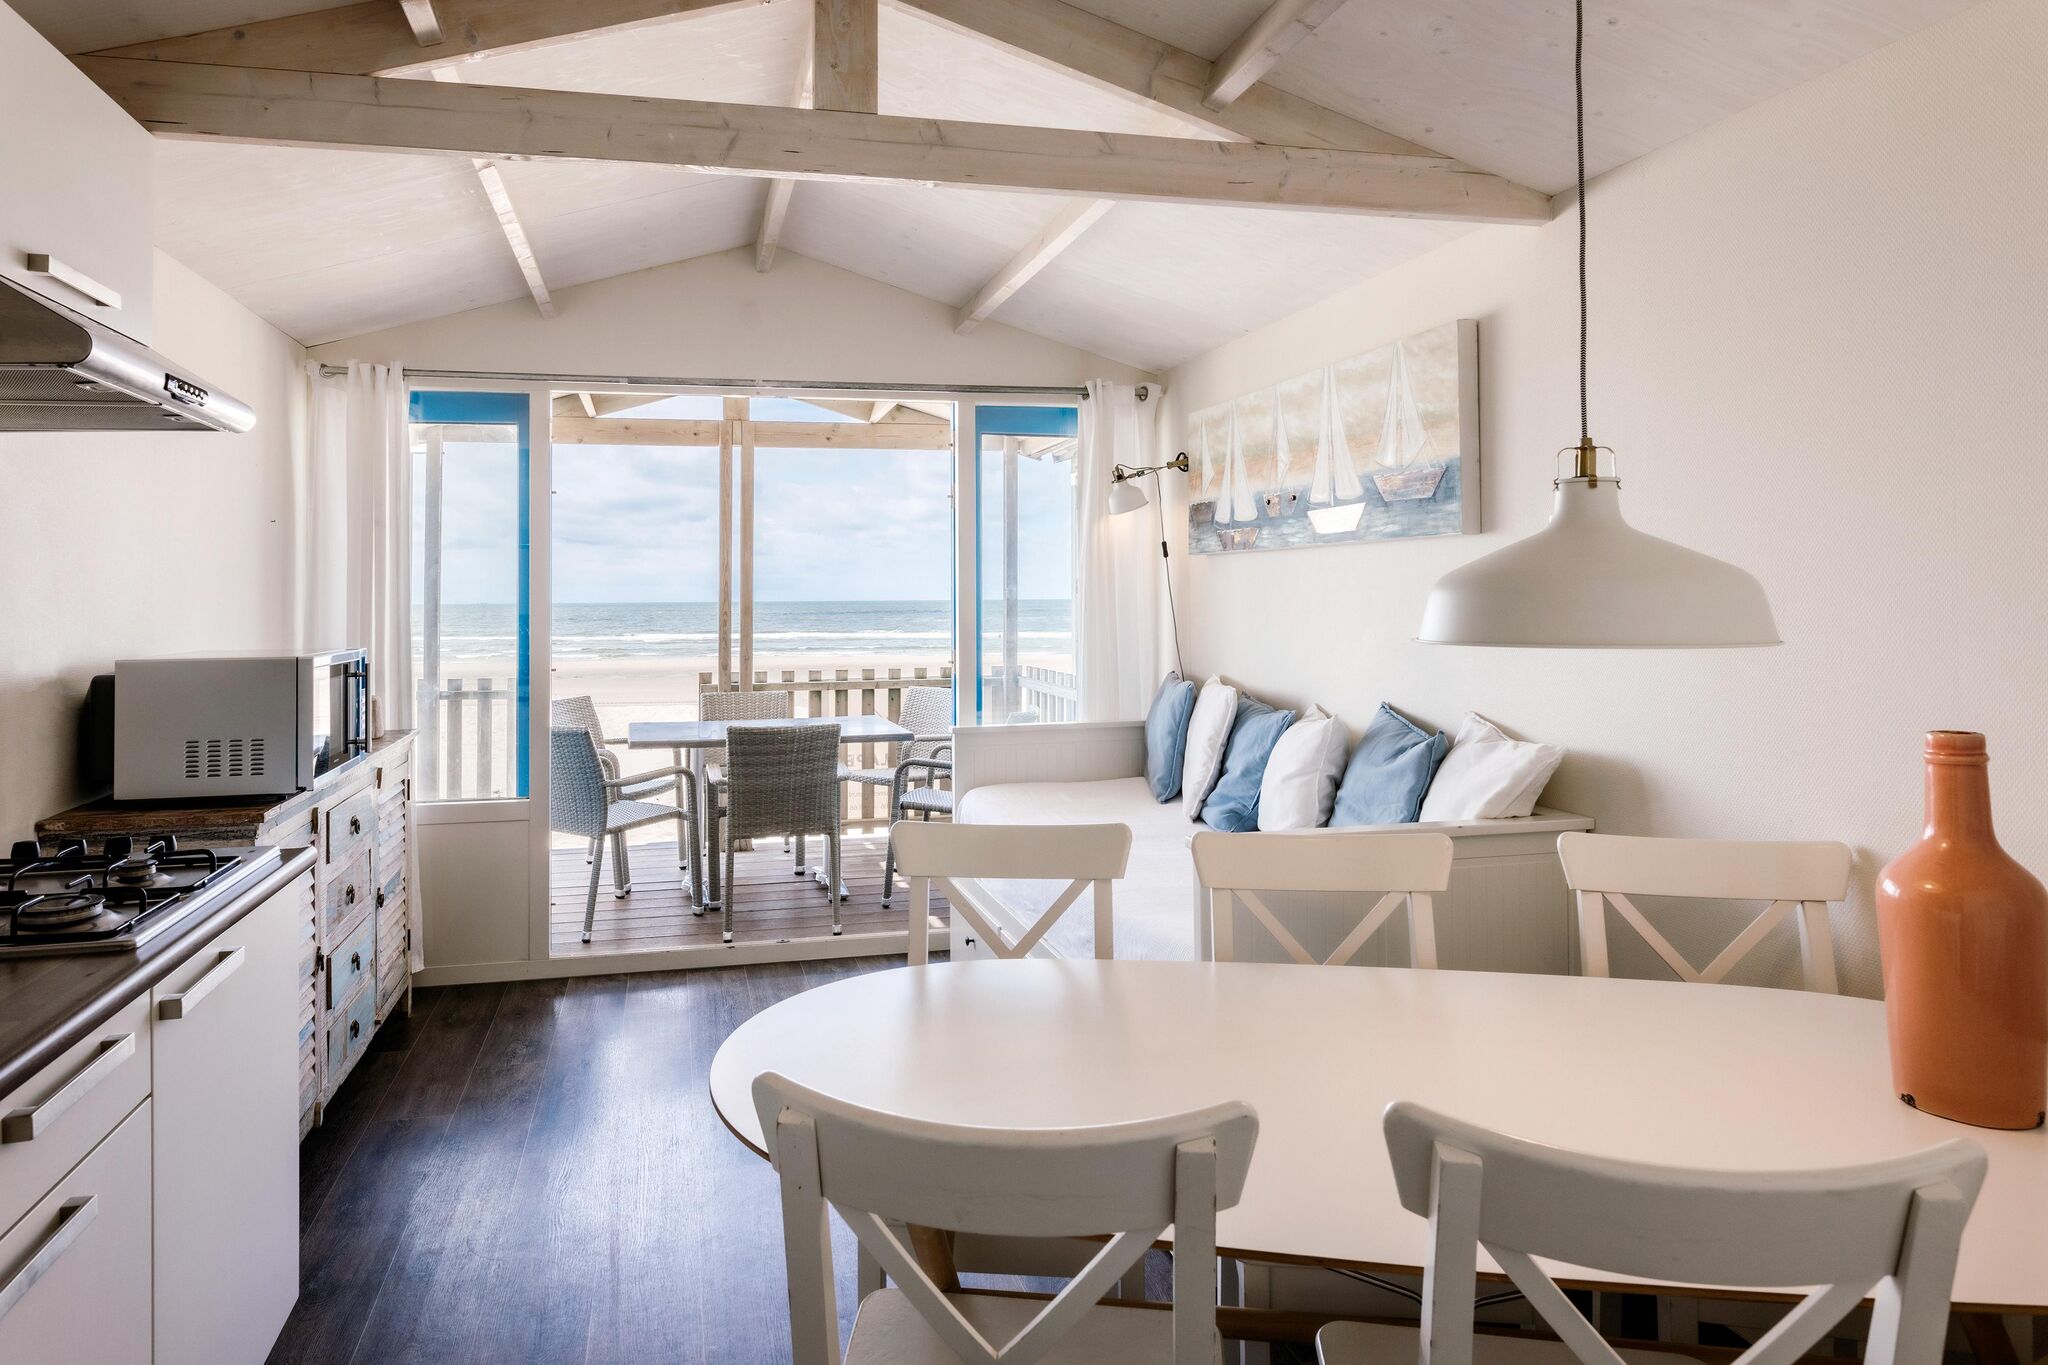 Beach lodge with direct sea view, on the North Sea beach of Wijk aan Zee